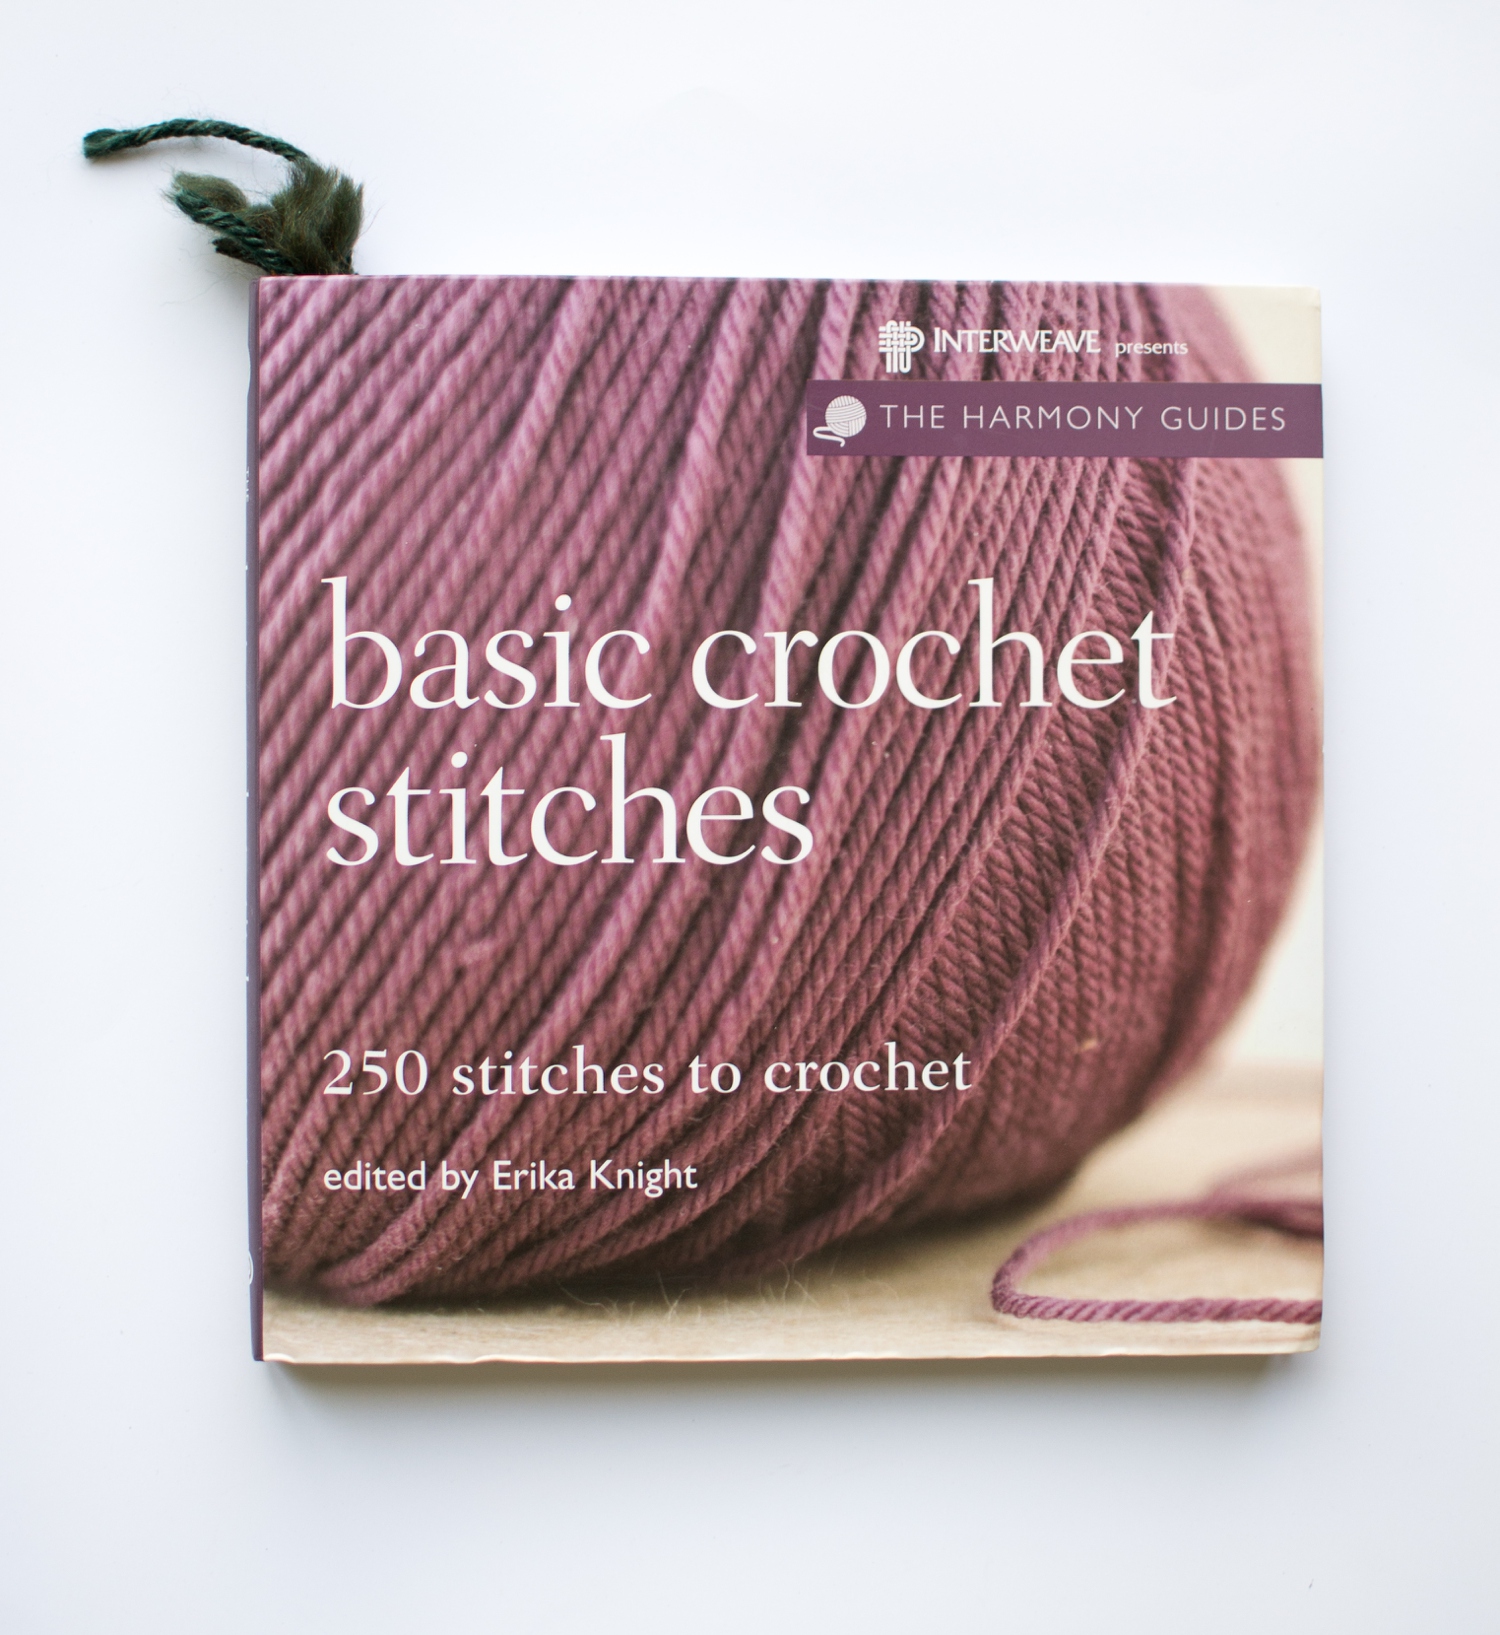 My Crochet Stitch Book Collection - Woods and Wool